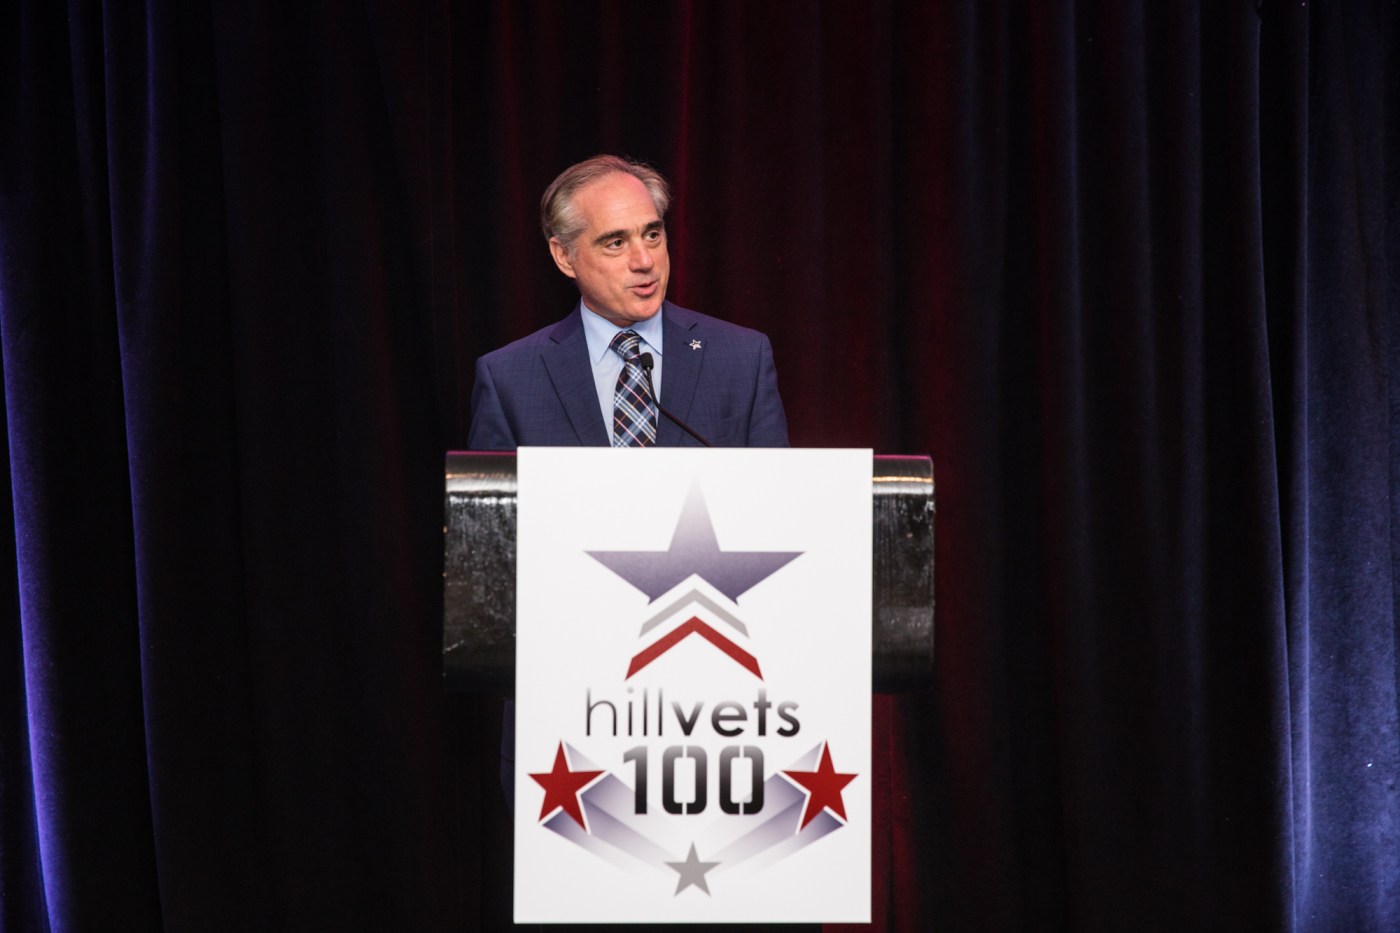 HillVets 100 Tribute Gala honors 100 influential people in service to Veterans